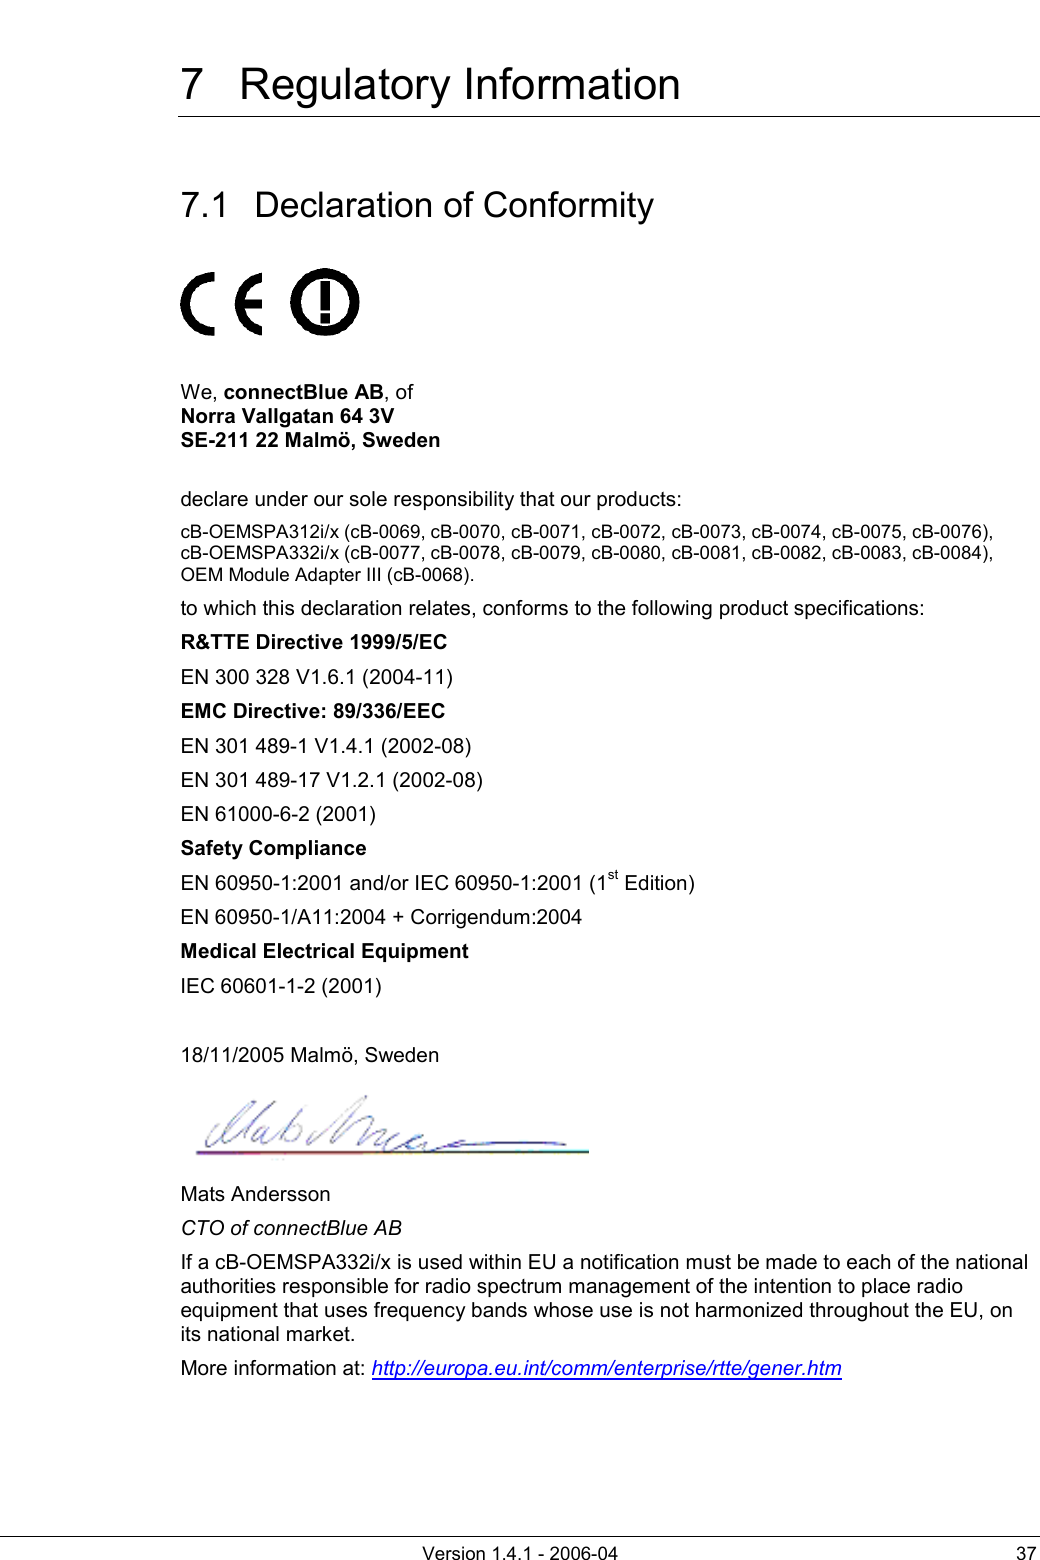          Version 1.4.1 - 2006-04  37 7 Regulatory Information 7.1  Declaration of Conformity          We, connectBlue AB, of  Norra Vallgatan 64 3V SE-211 22 Malmö, Sweden  declare under our sole responsibility that our products:  cB-OEMSPA312i/x (cB-0069, cB-0070, cB-0071, cB-0072, cB-0073, cB-0074, cB-0075, cB-0076),   cB-OEMSPA332i/x (cB-0077, cB-0078, cB-0079, cB-0080, cB-0081, cB-0082, cB-0083, cB-0084), OEM Module Adapter III (cB-0068). to which this declaration relates, conforms to the following product specifications: R&amp;TTE Directive 1999/5/EC EN 300 328 V1.6.1 (2004-11) EMC Directive: 89/336/EEC EN 301 489-1 V1.4.1 (2002-08) EN 301 489-17 V1.2.1 (2002-08) EN 61000-6-2 (2001) Safety Compliance EN 60950-1:2001 and/or IEC 60950-1:2001 (1st Edition)  EN 60950-1/A11:2004 + Corrigendum:2004 Medical Electrical Equipment IEC 60601-1-2 (2001)  18/11/2005 Malmö, Sweden  Mats Andersson CTO of connectBlue AB If a cB-OEMSPA332i/x is used within EU a notification must be made to each of the national authorities responsible for radio spectrum management of the intention to place radio equipment that uses frequency bands whose use is not harmonized throughout the EU, on its national market. More information at: http://europa.eu.int/comm/enterprise/rtte/gener.htm 